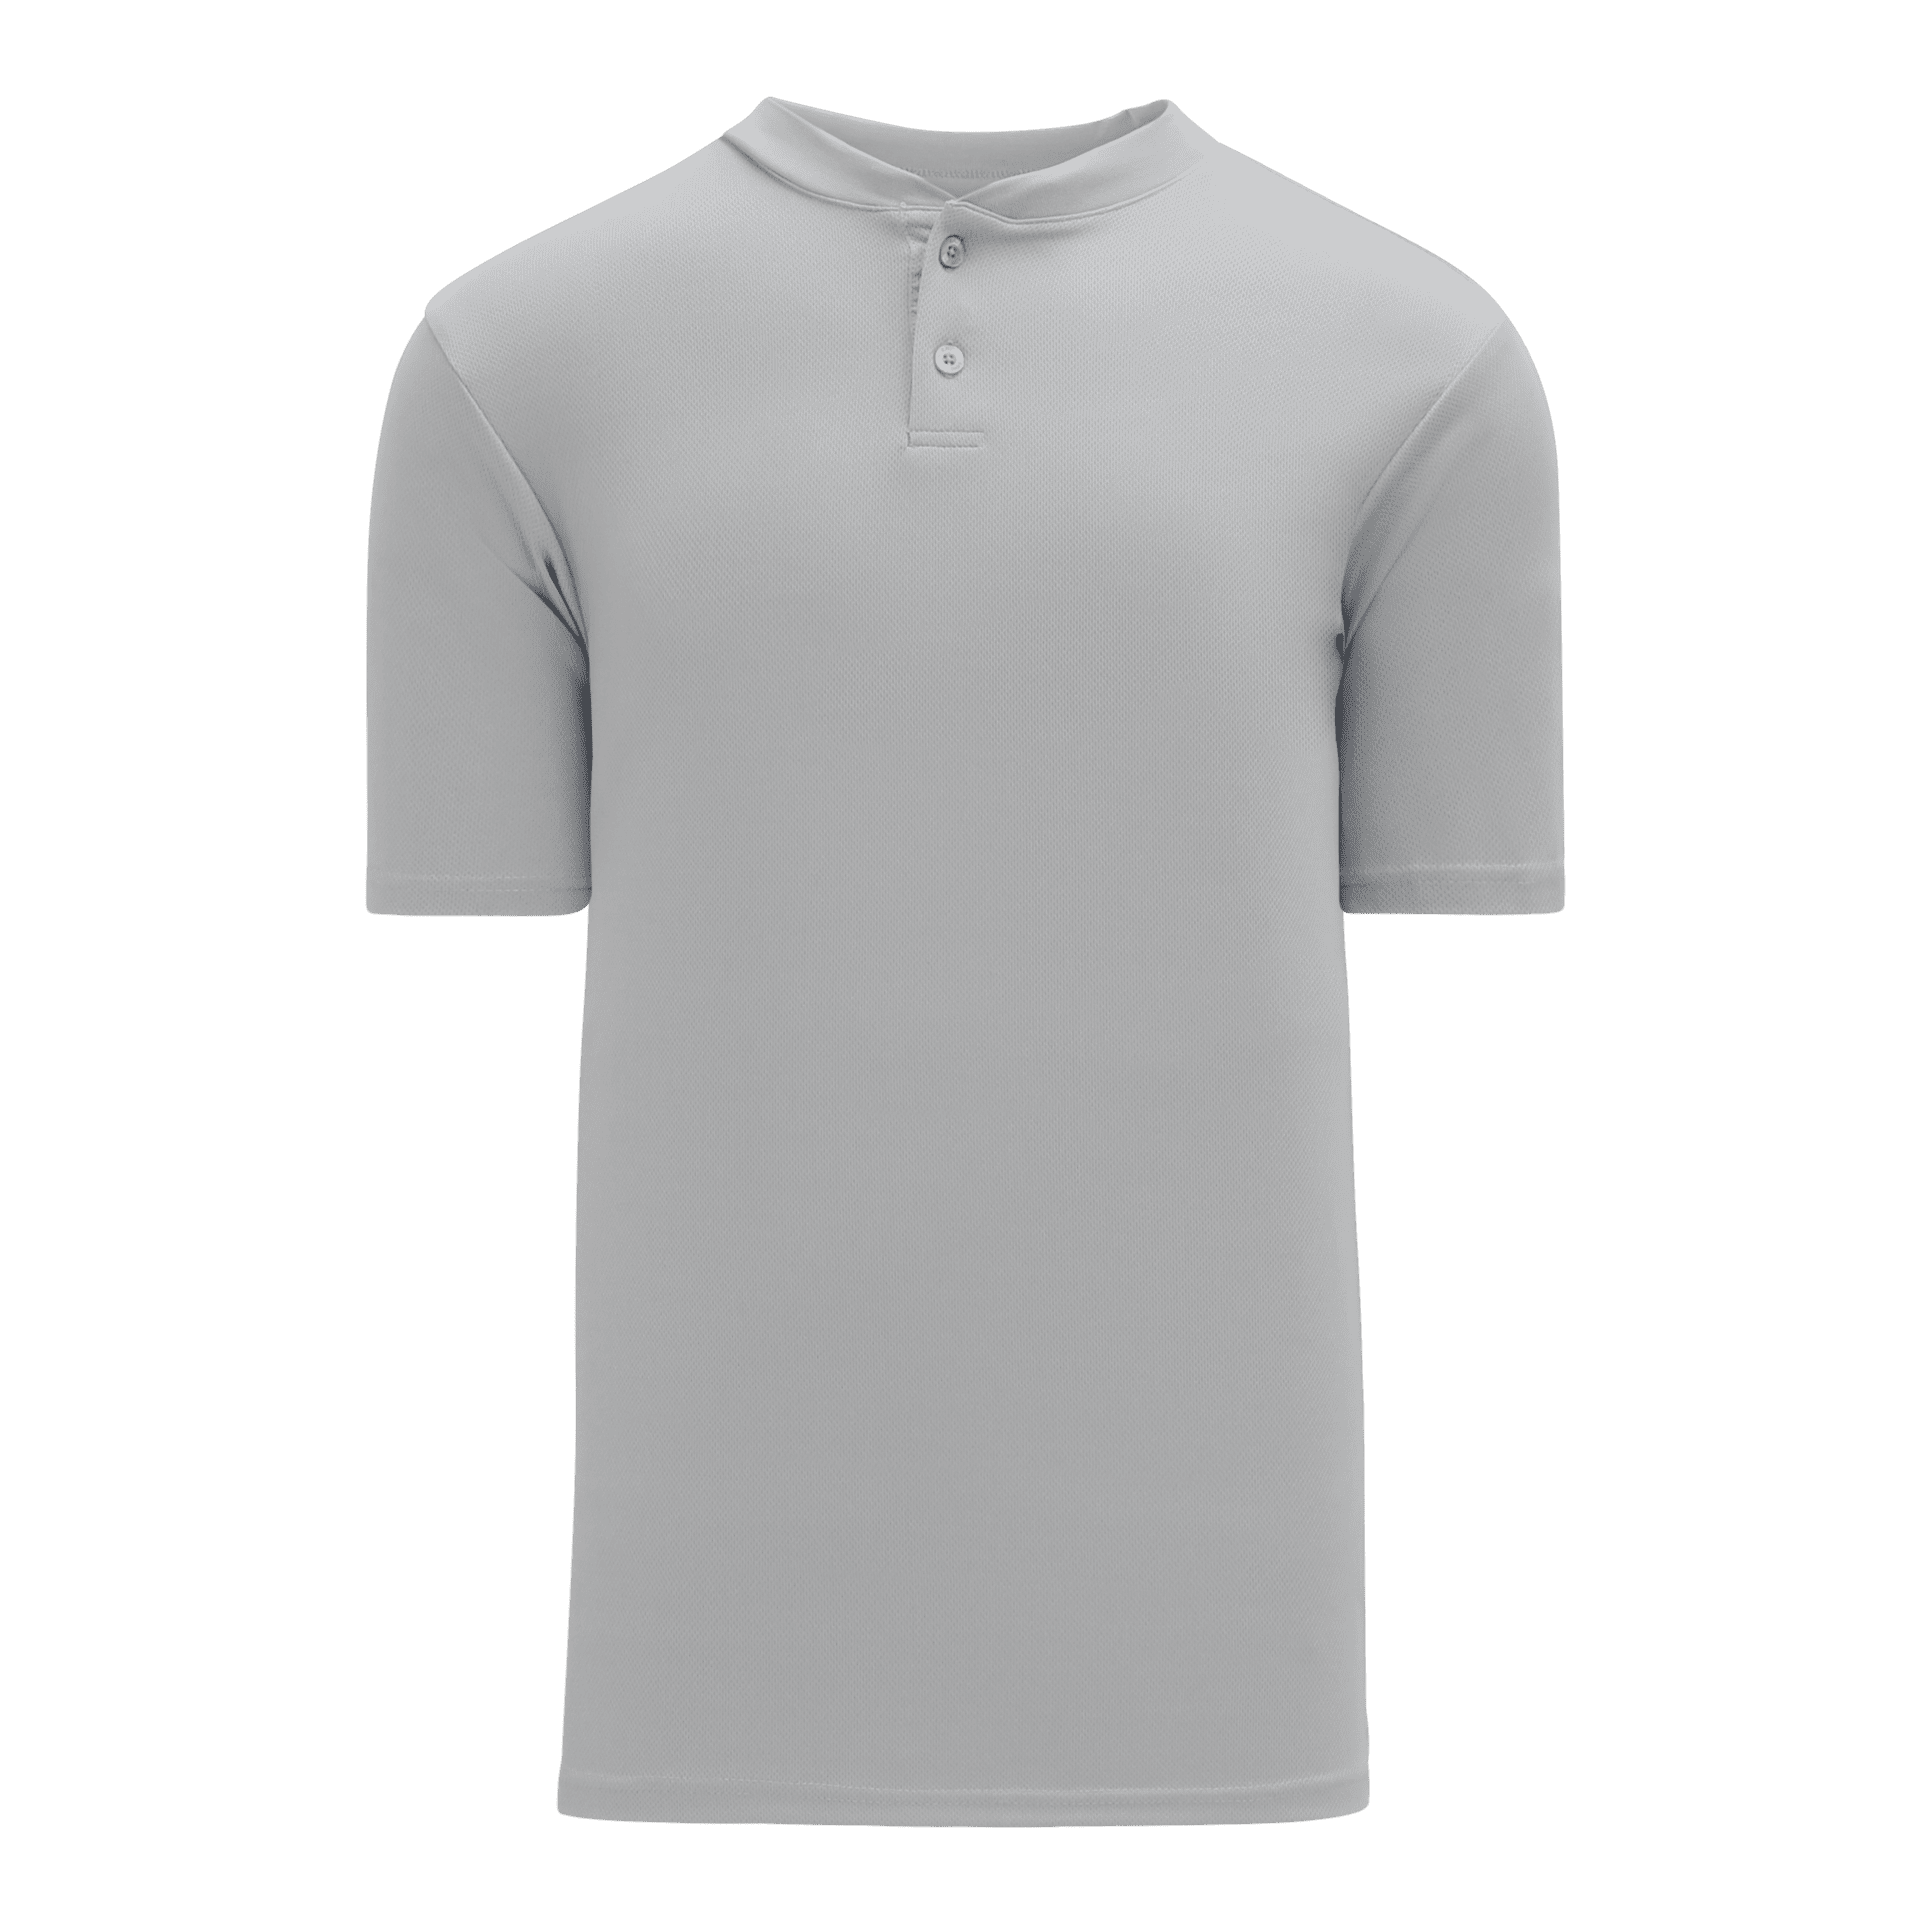 ATHLETIC KNIT TWO BUTTON BASEBALL JERSEY #BA1347 Grey